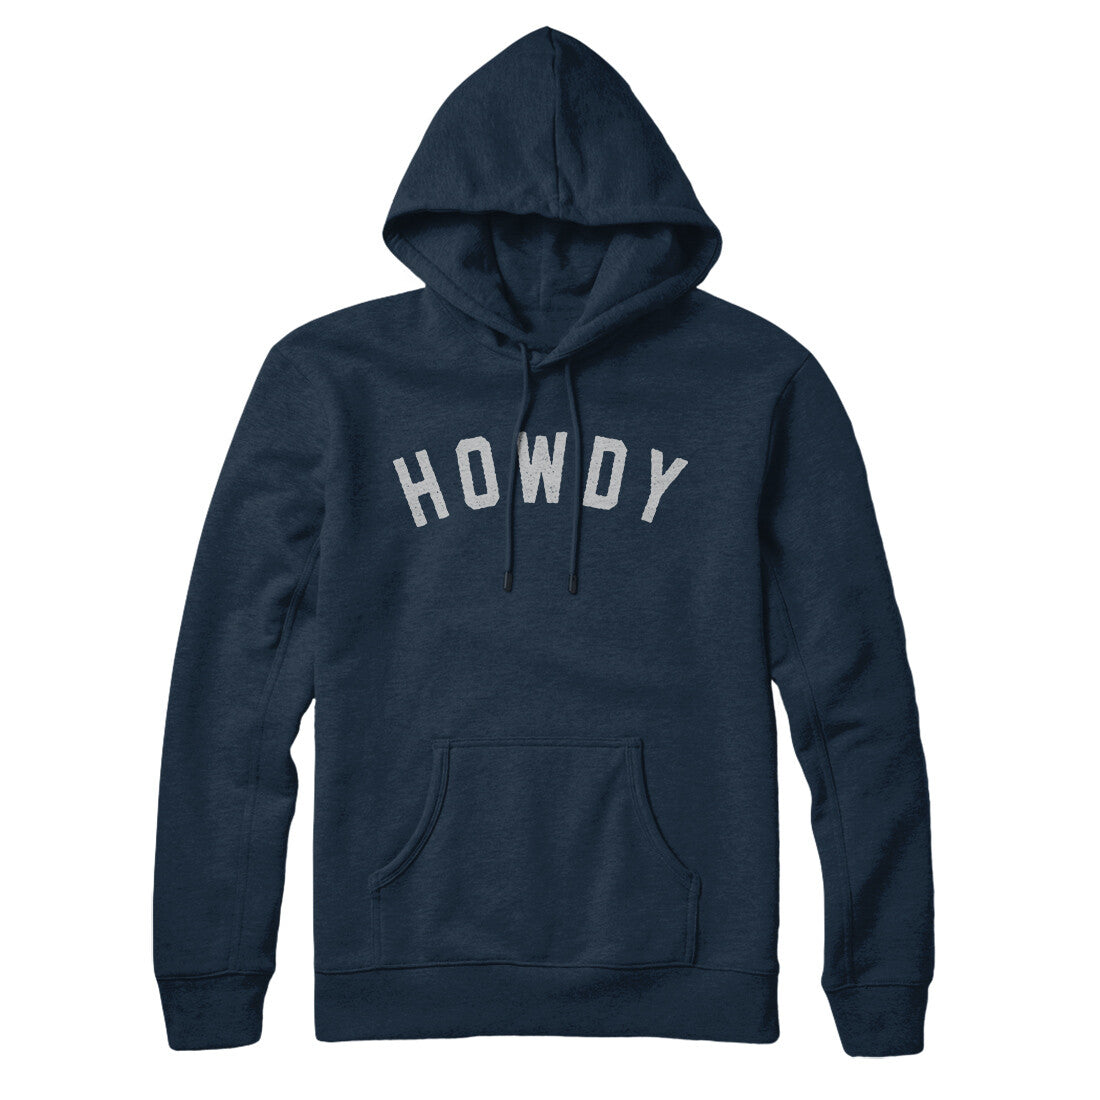 Howdy in Navy Blue Color